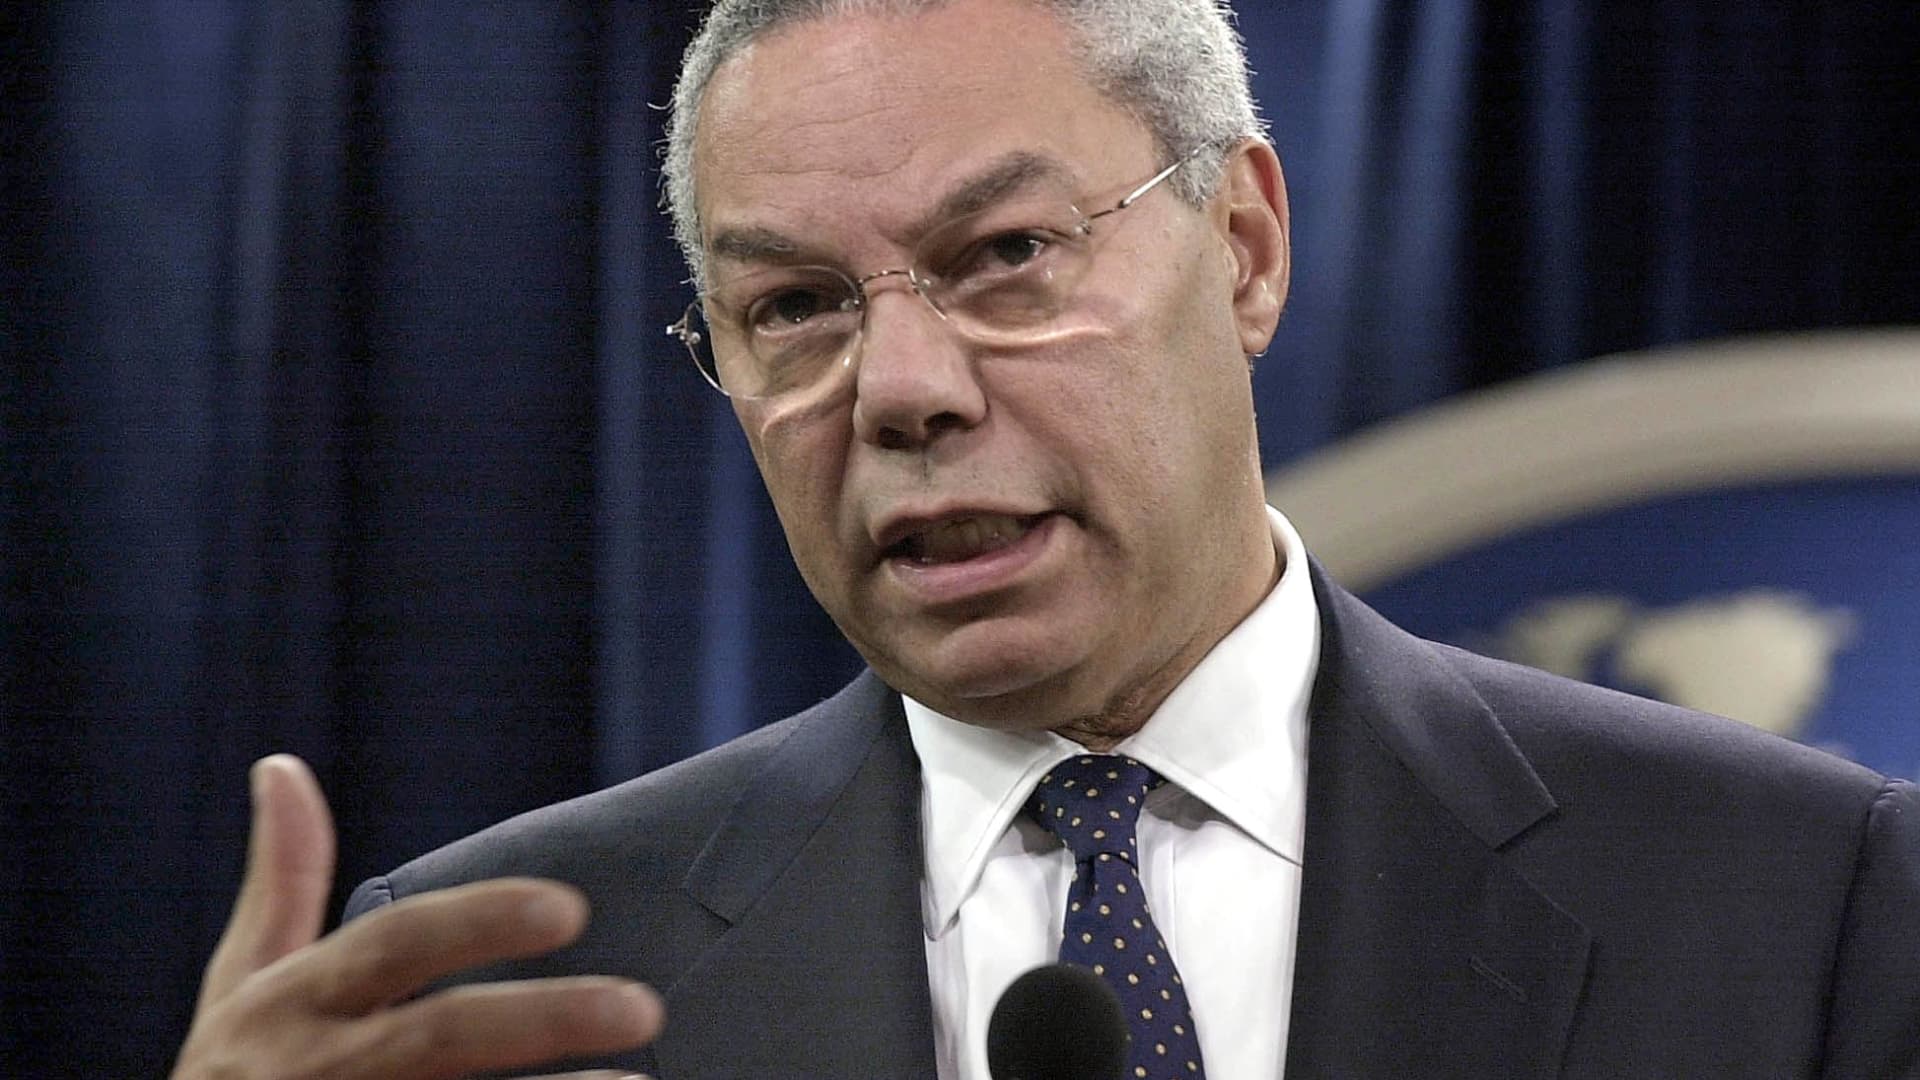 US Secretary of State Colin Powell answers questions during a briefing 12 September 2001 at the State Department in Washington, DC.